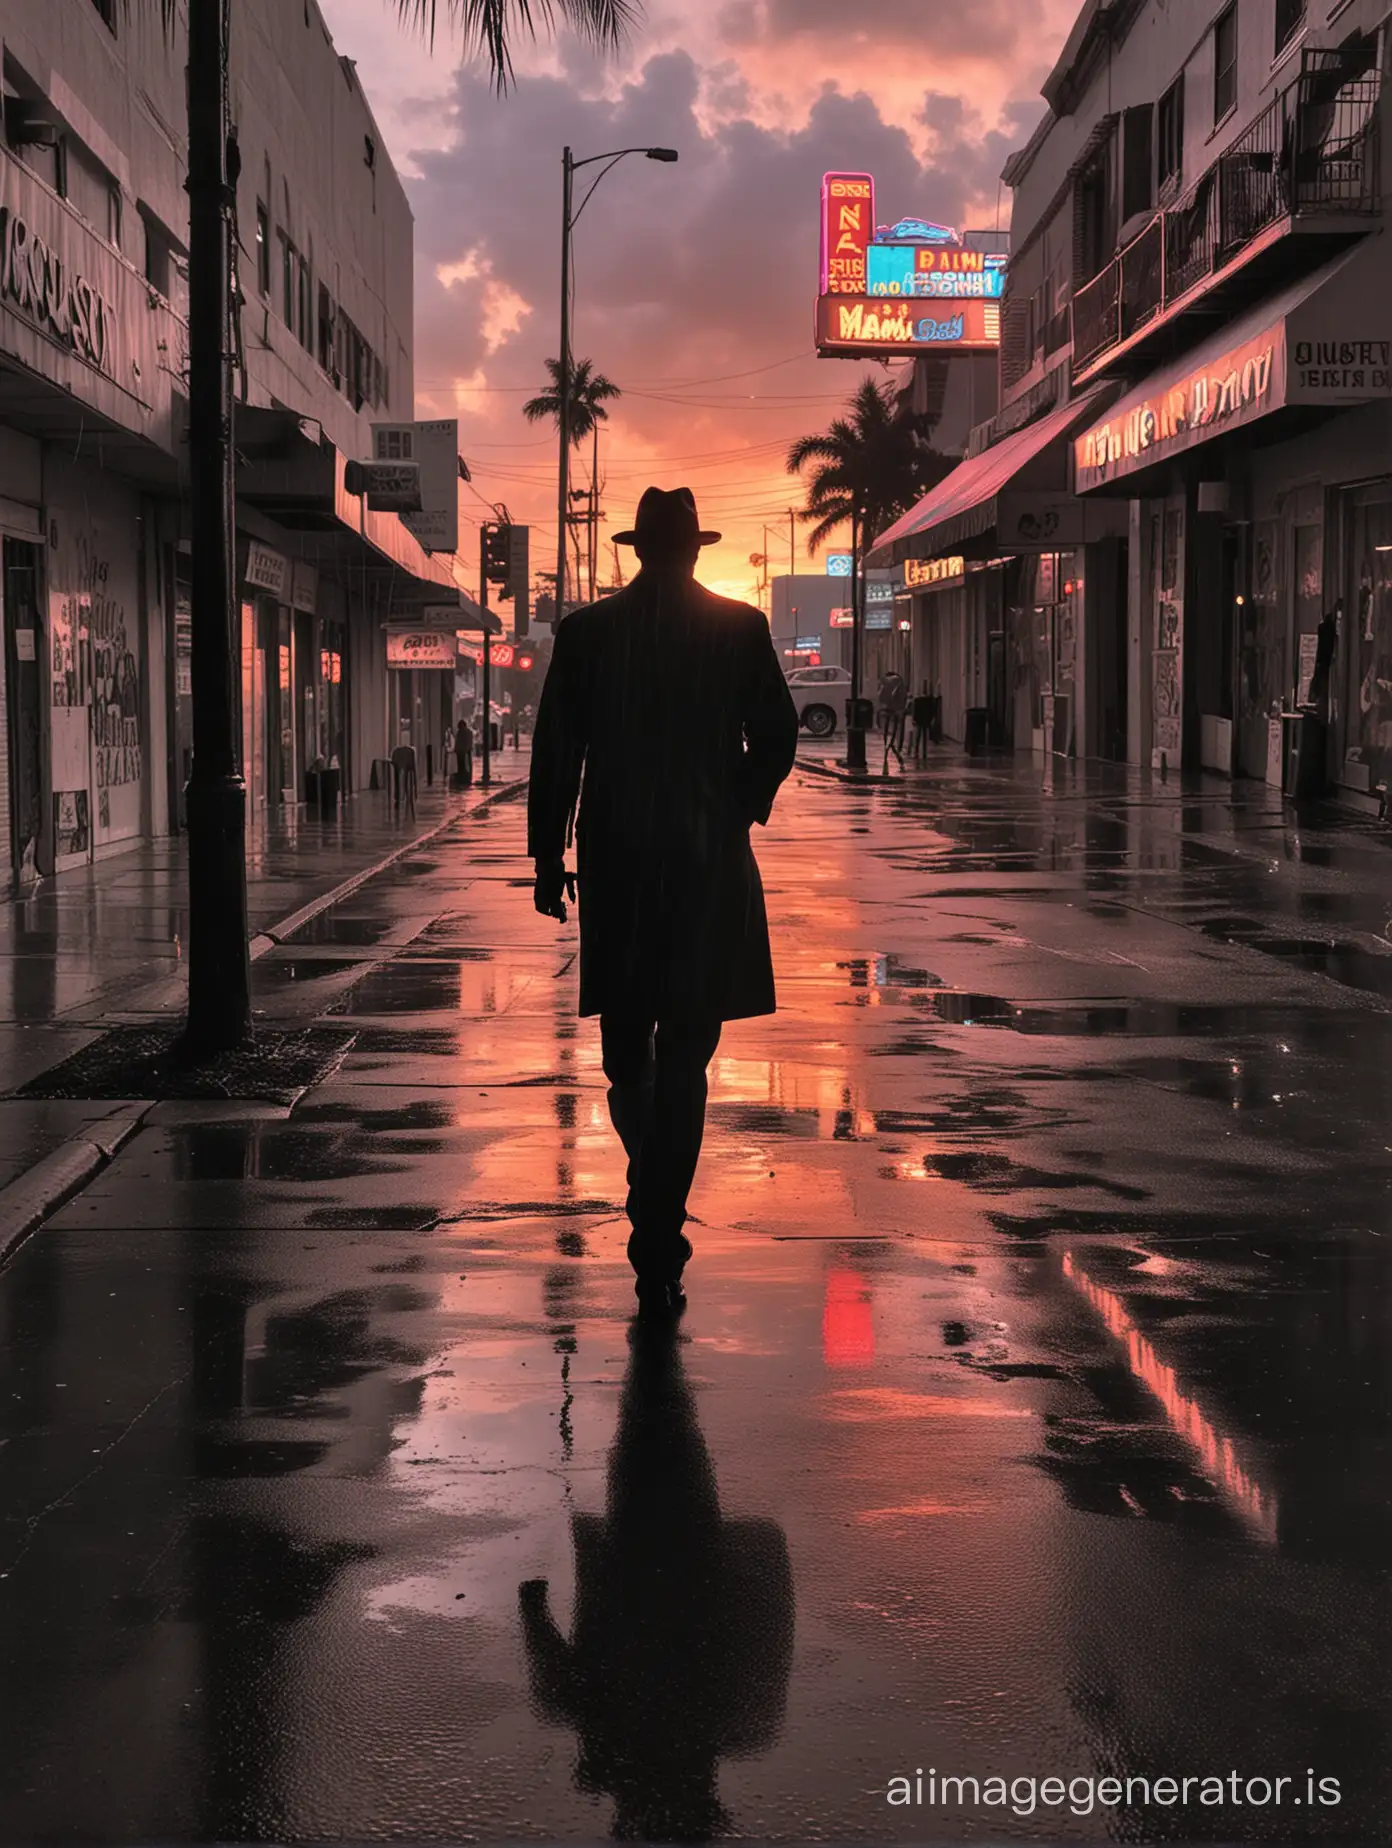 A lone detective silhouetted against a blazing Miami sunset, reflected in the rain-slicked streets lined with neon signs.